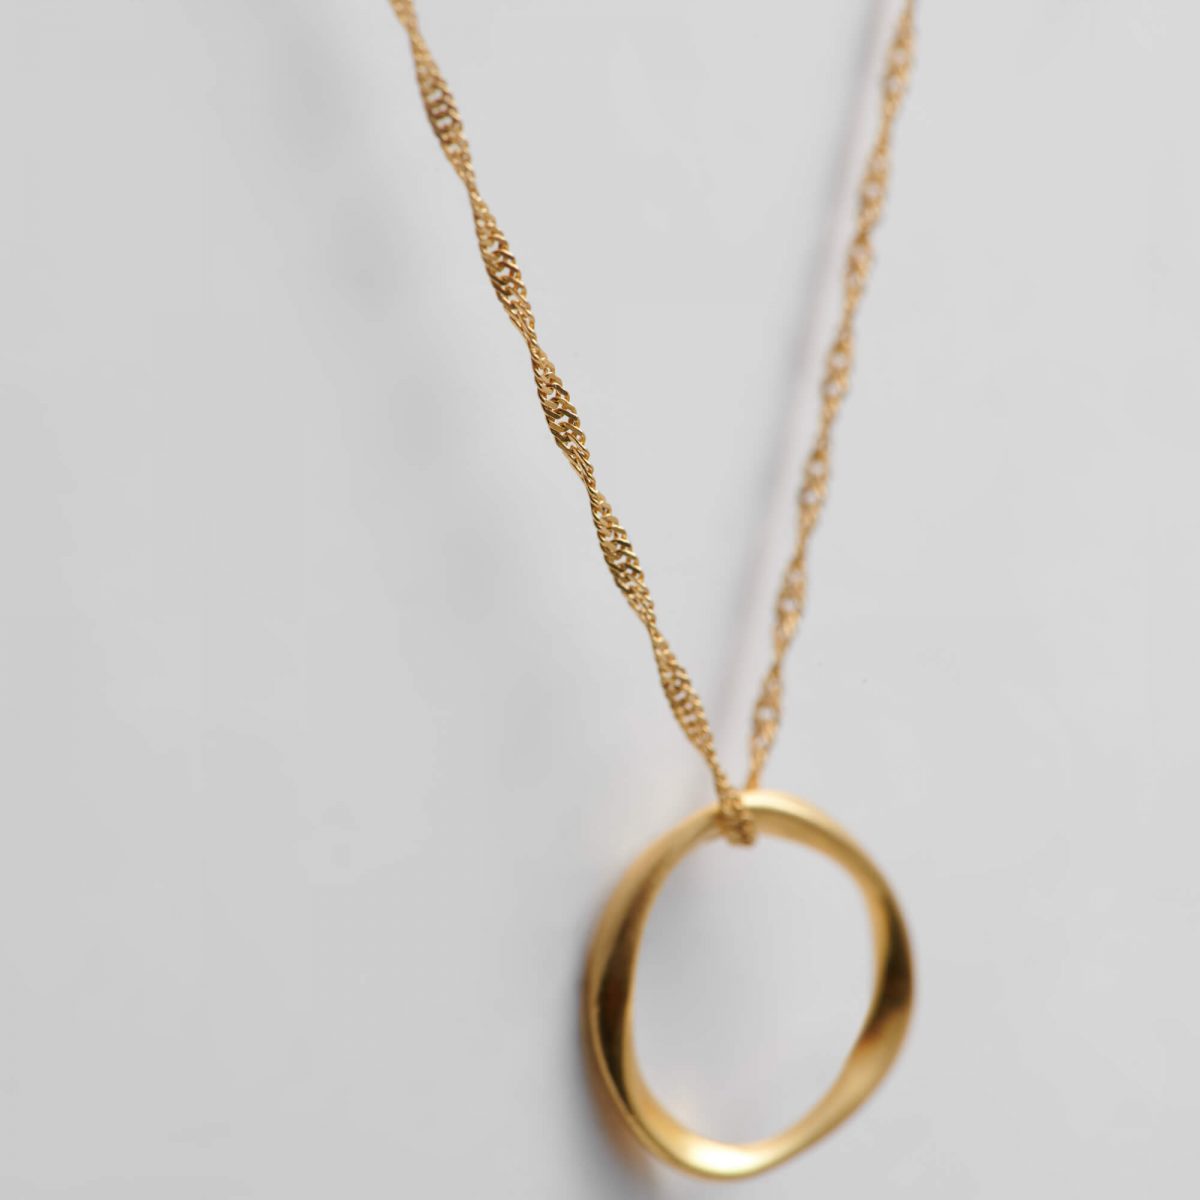 Gold and Silver Melted Wax Necklace by Xoutou's